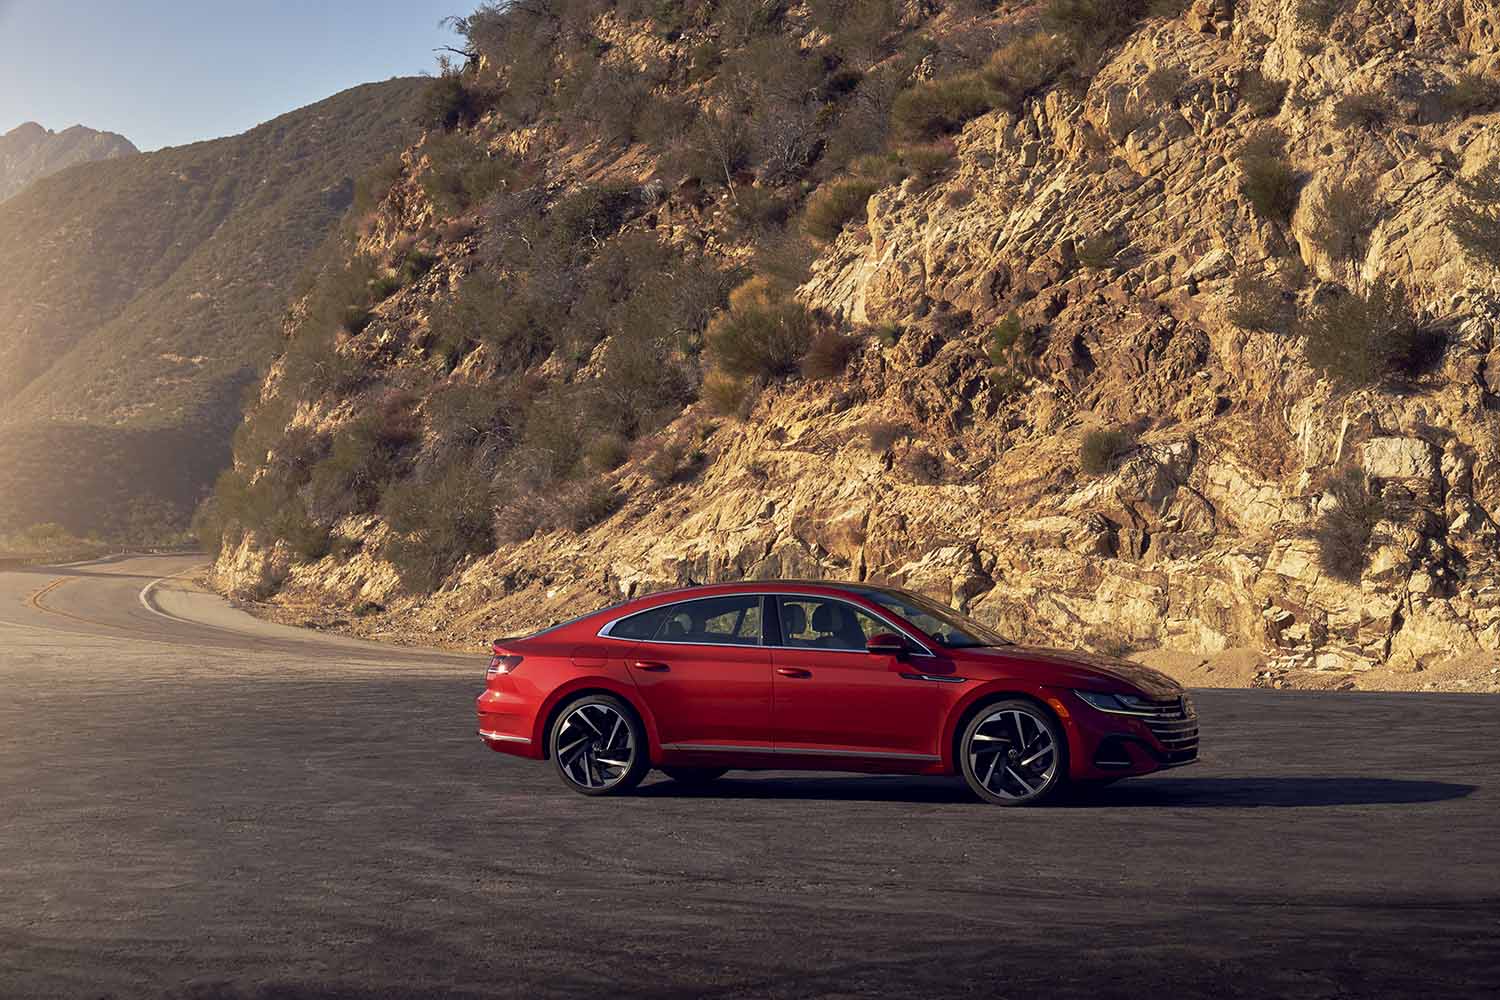 2021 Volkswagen Arteon in red driving on a road next to mountains